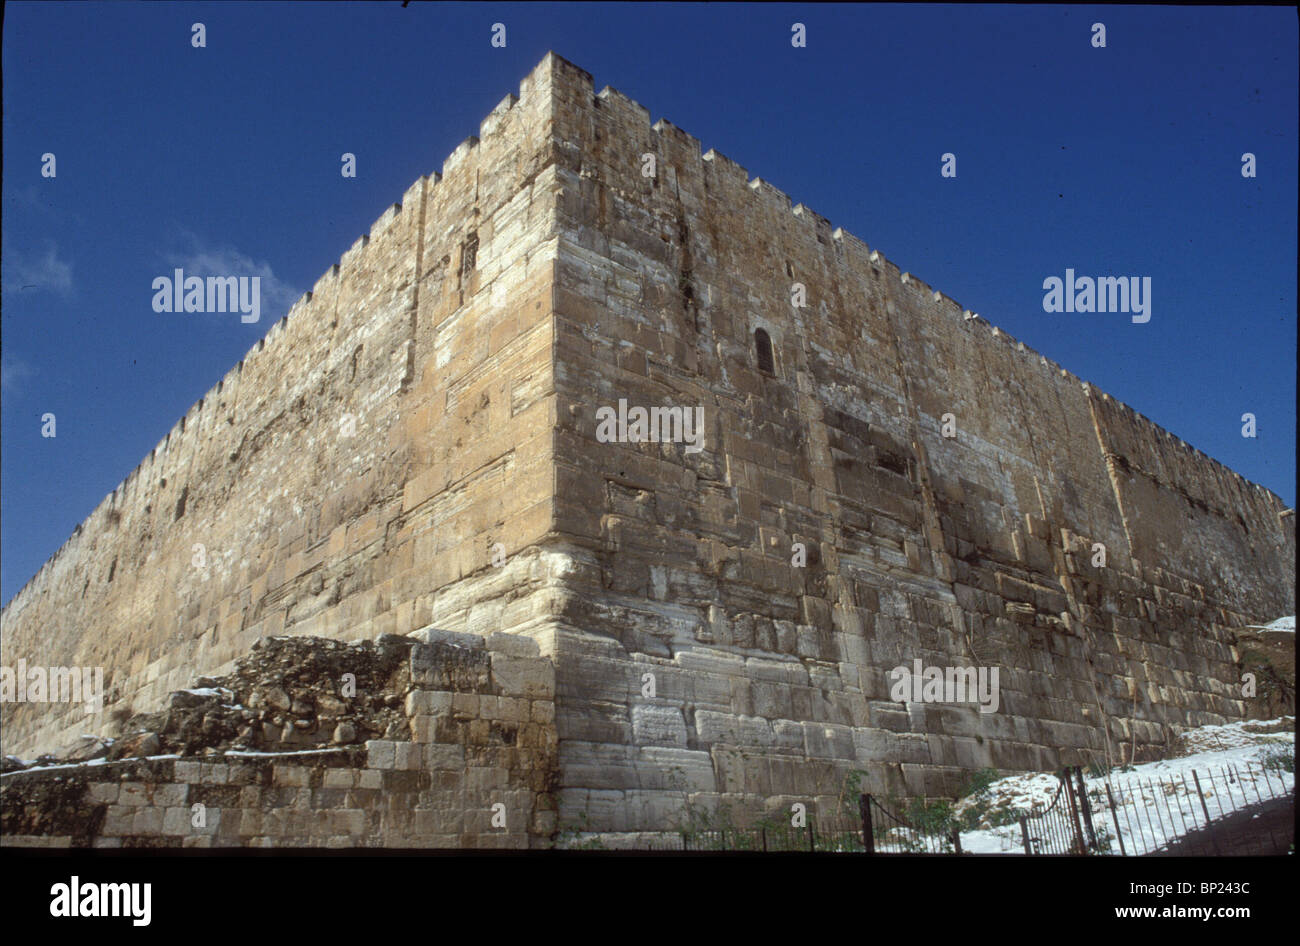 376. THE SOUTH/EASTERN CORNER OF THE HERODIAN WALL ENCIRCLING THE TEMPLE MOUNT PRECINCT Stock Photo